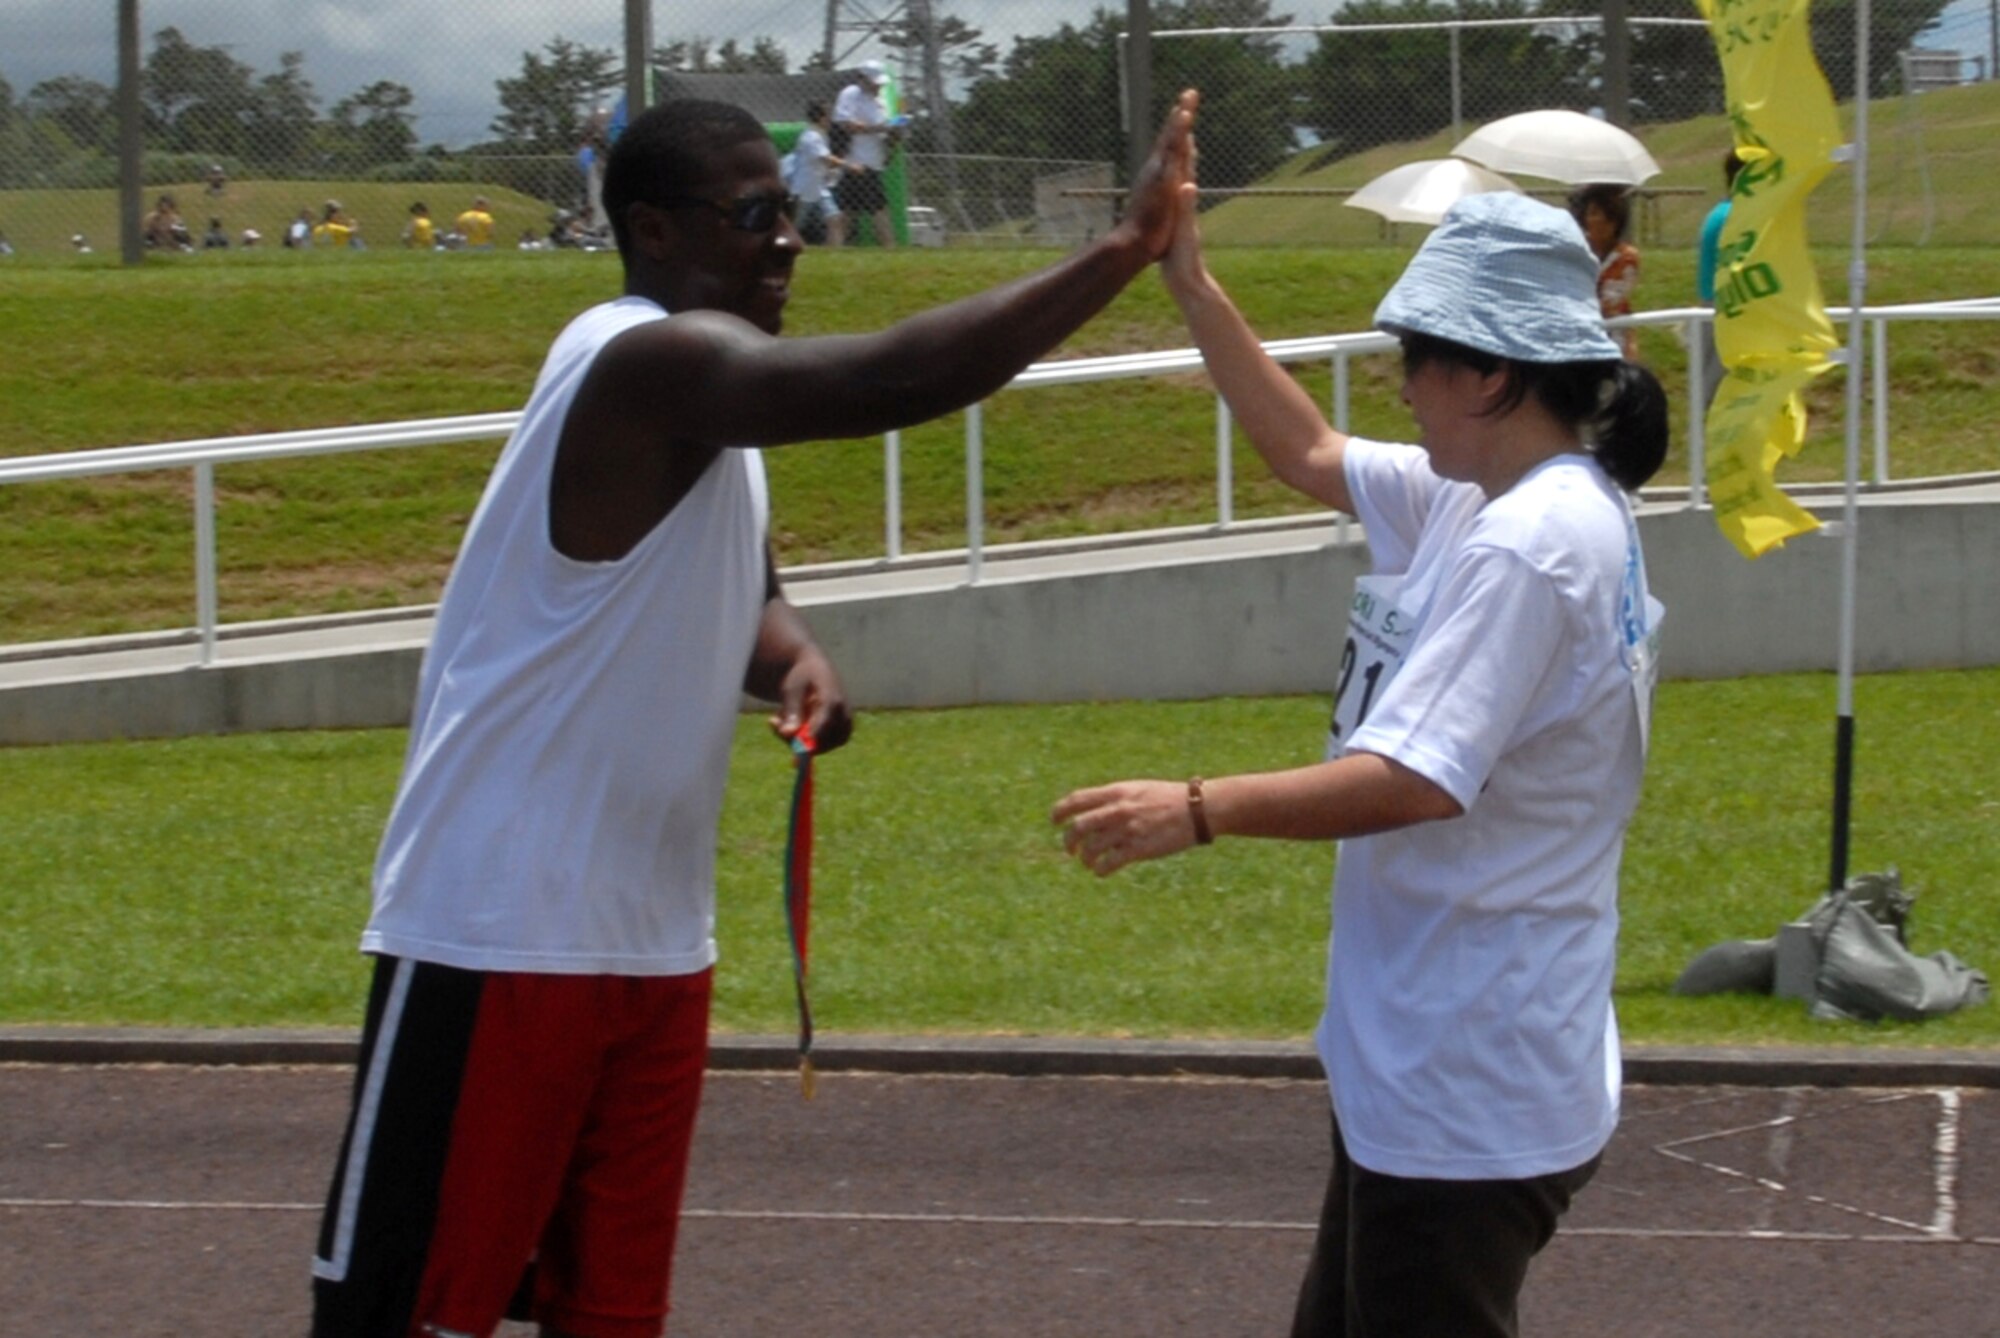 Senior Airman Hulon Polk, 18th Equipment Maintenance Squadron, high fives Kaori Shiroma, Friends House Workshop, as she completes her 200-meter dash during the Special Olympics held at Kadena Air Base, Japan, June 24.
(U.S. Air Force/Airman 1st Class Kasey Zickmund)